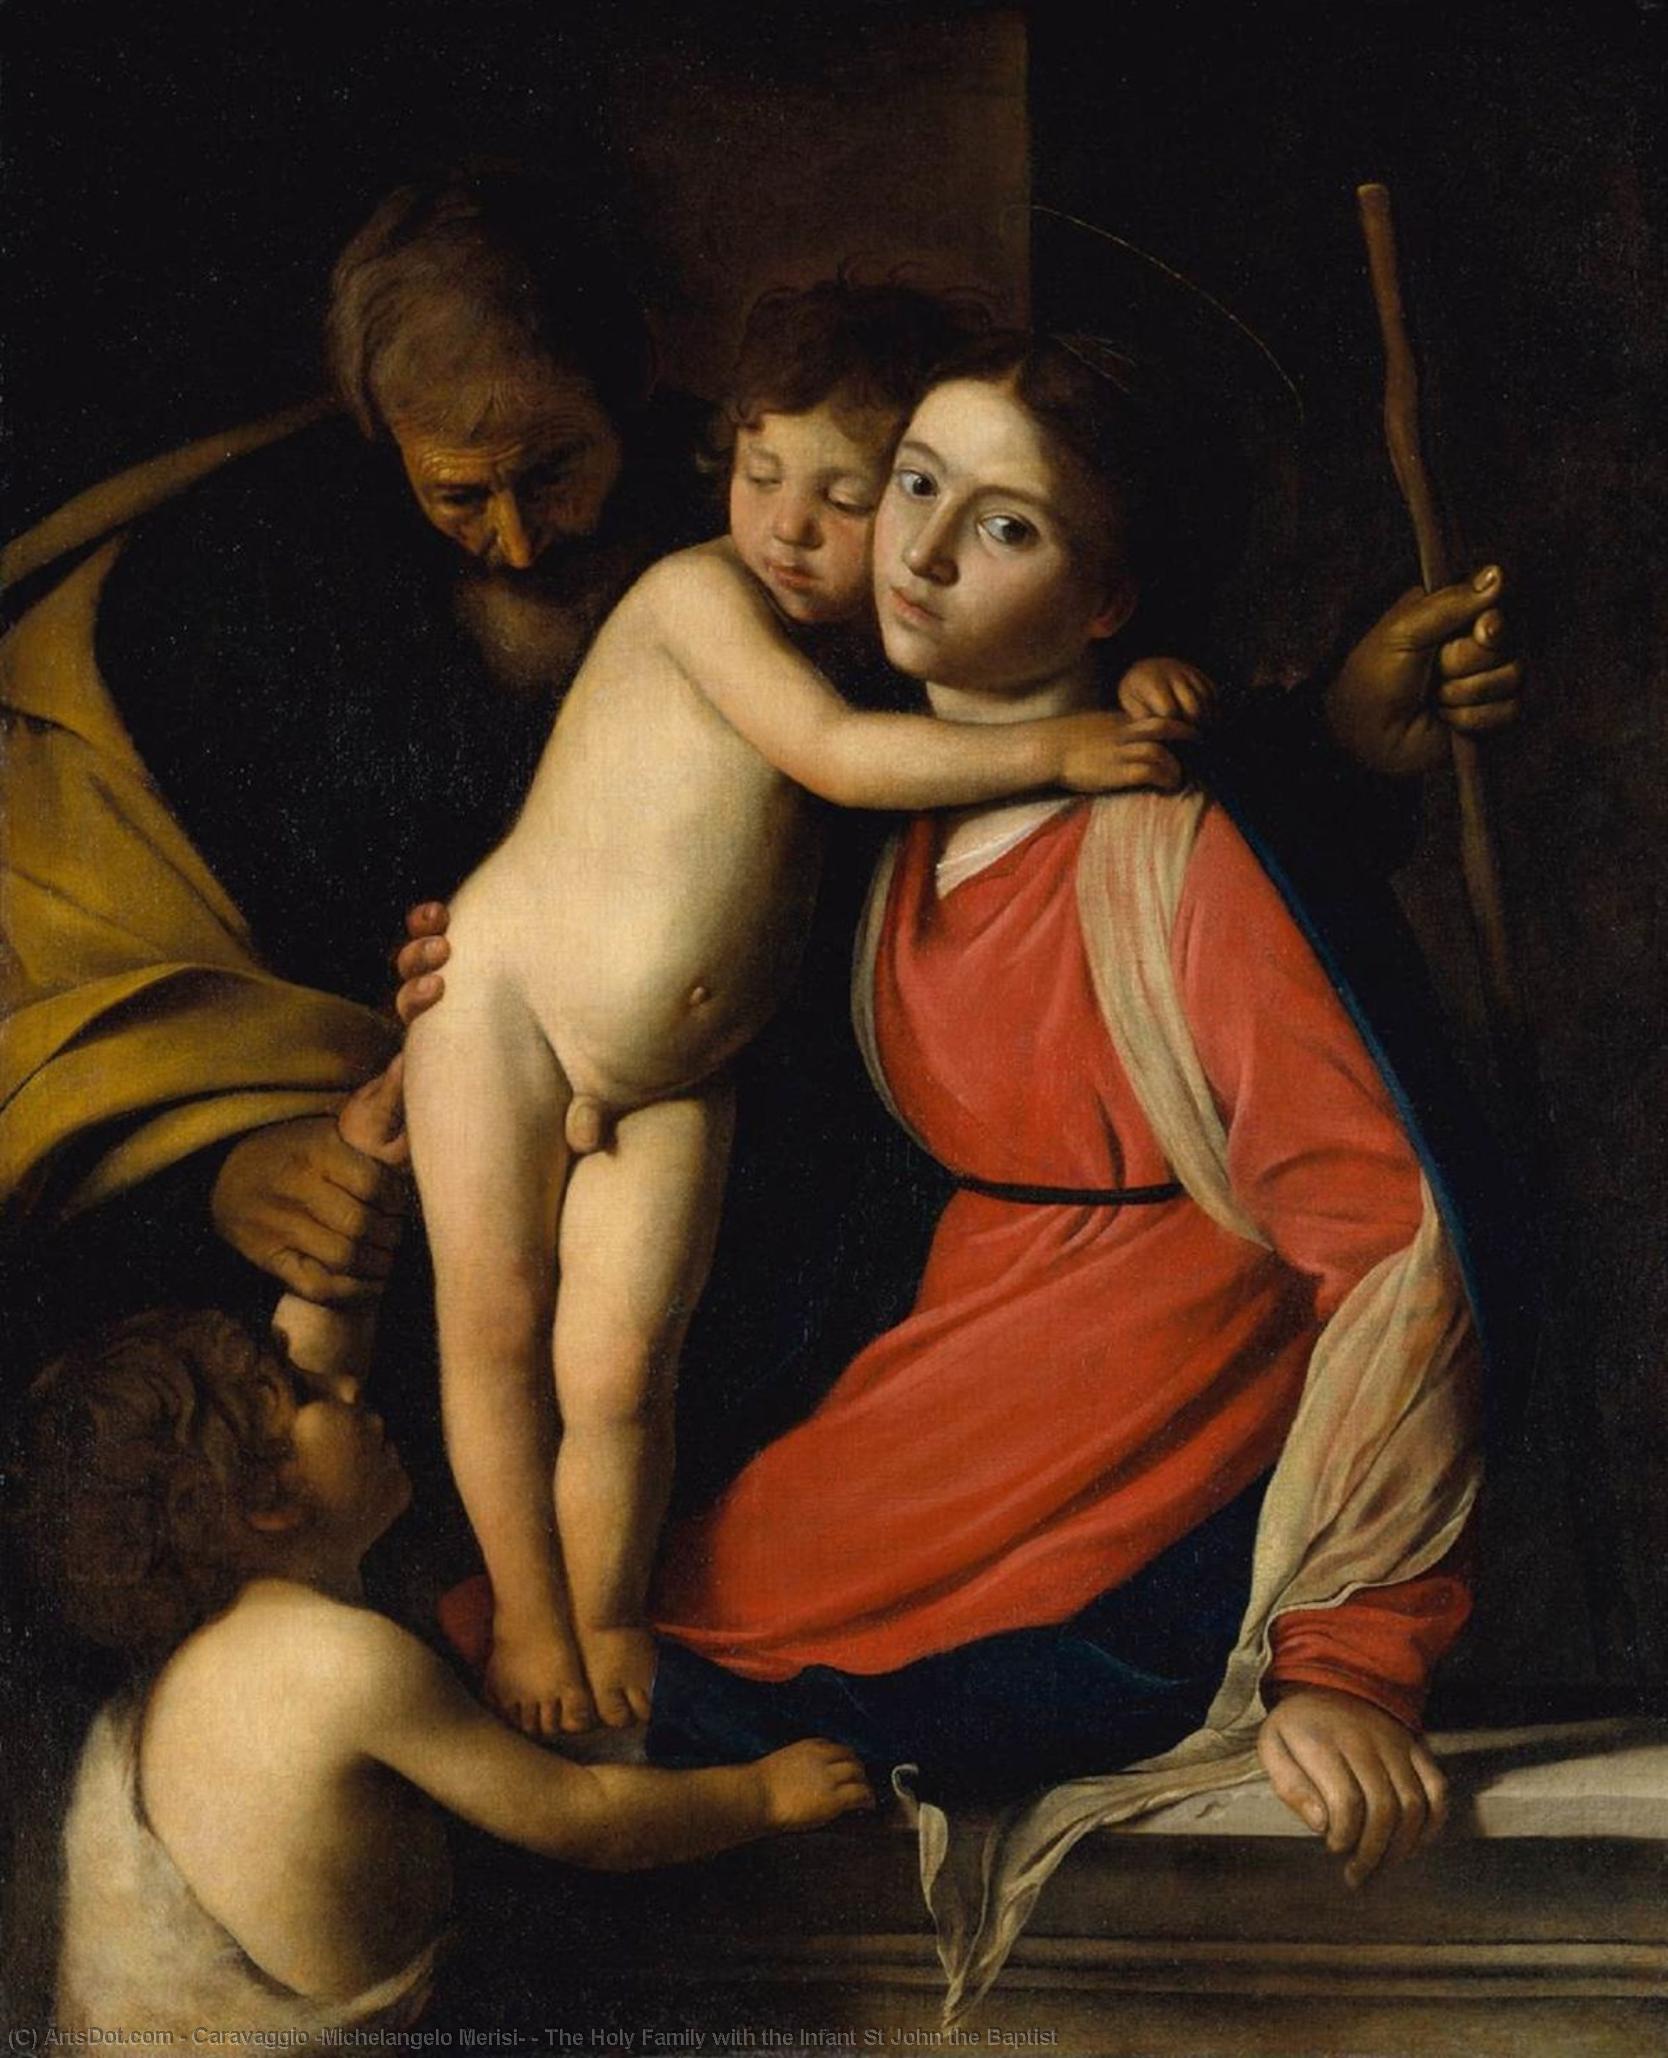 WikiOO.org - 백과 사전 - 회화, 삽화 Caravaggio (Michelangelo Merisi) - The Holy Family with the Infant St John the Baptist